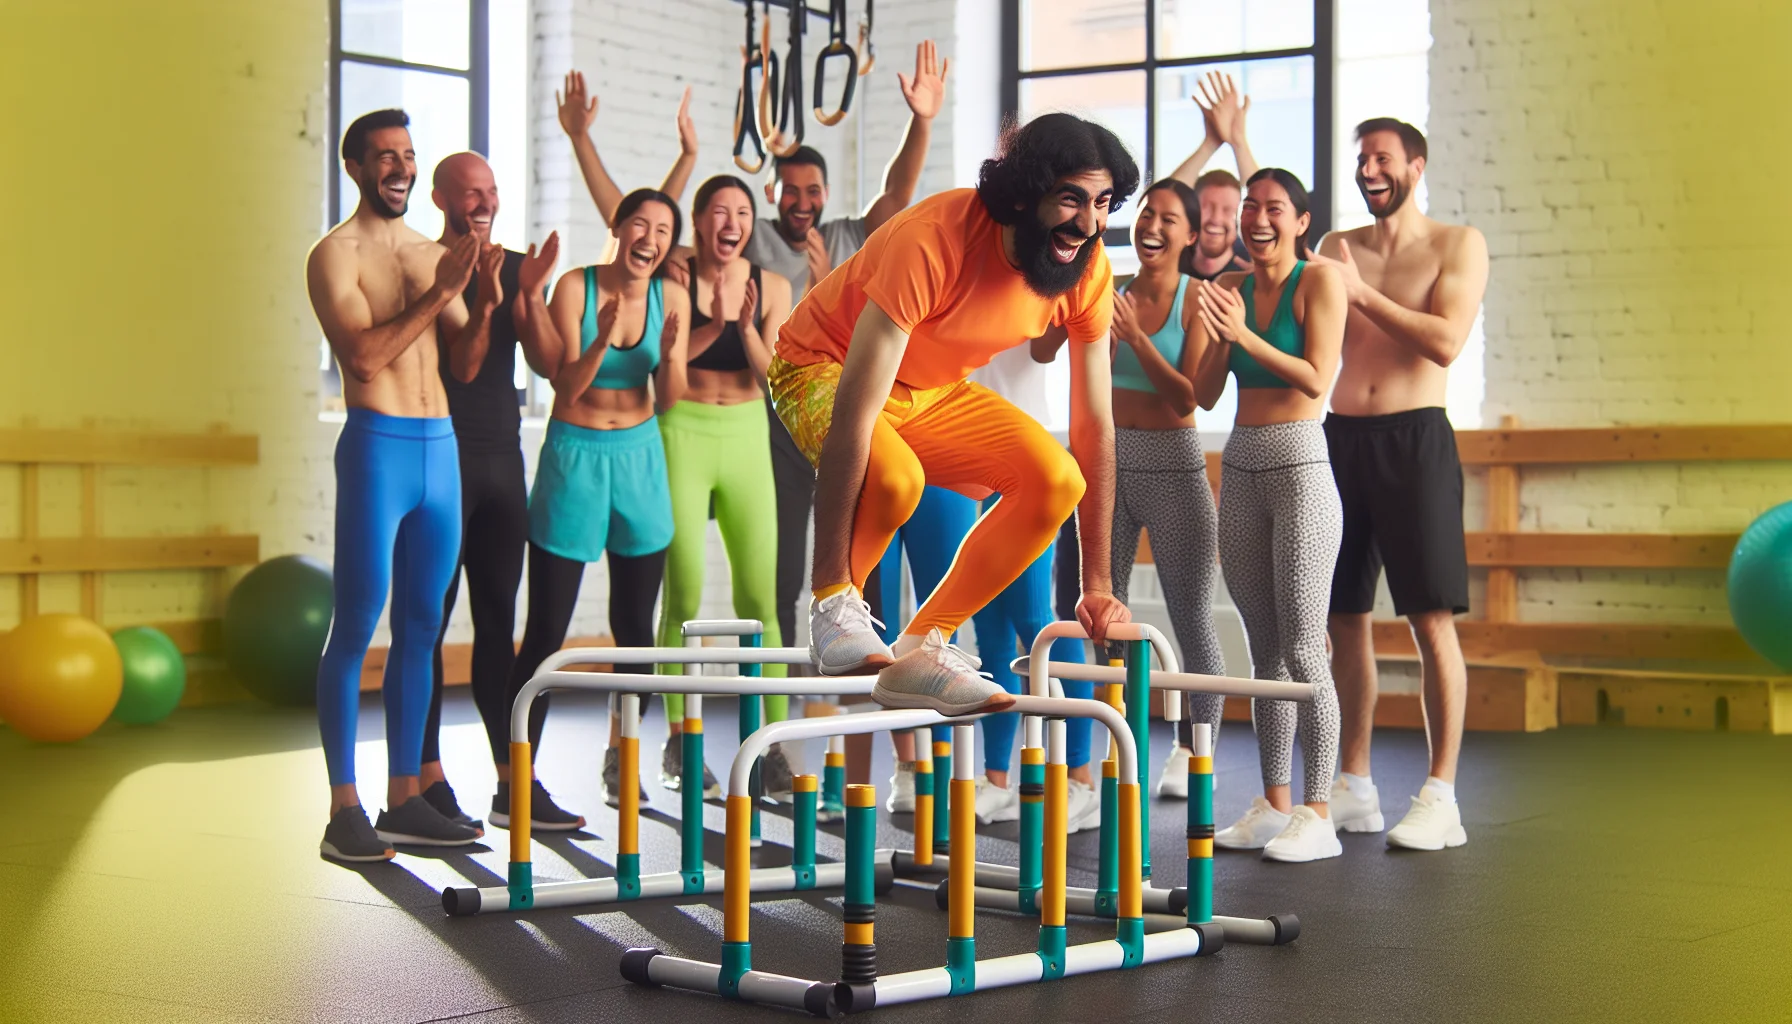 Imagine a humorous scenario that encourages exercise. The scene takes place in a bright, well-lit gym. On the floor are calisthenics parallettes. An energetic and smiling person of Middle-Eastern descent, dressed in bright workout clothes, is attempting to balance on the parallettes in an unusual and funny yoga position. Around them, a group of onlookers of various descents, including White, Black, South Asian, and Hispanic, both men and women, are laughing warmly and clapping their hands in amusement, encouragement written on their faces. The atmosphere is light, fun and welcoming, promising the enjoyment of exercise.